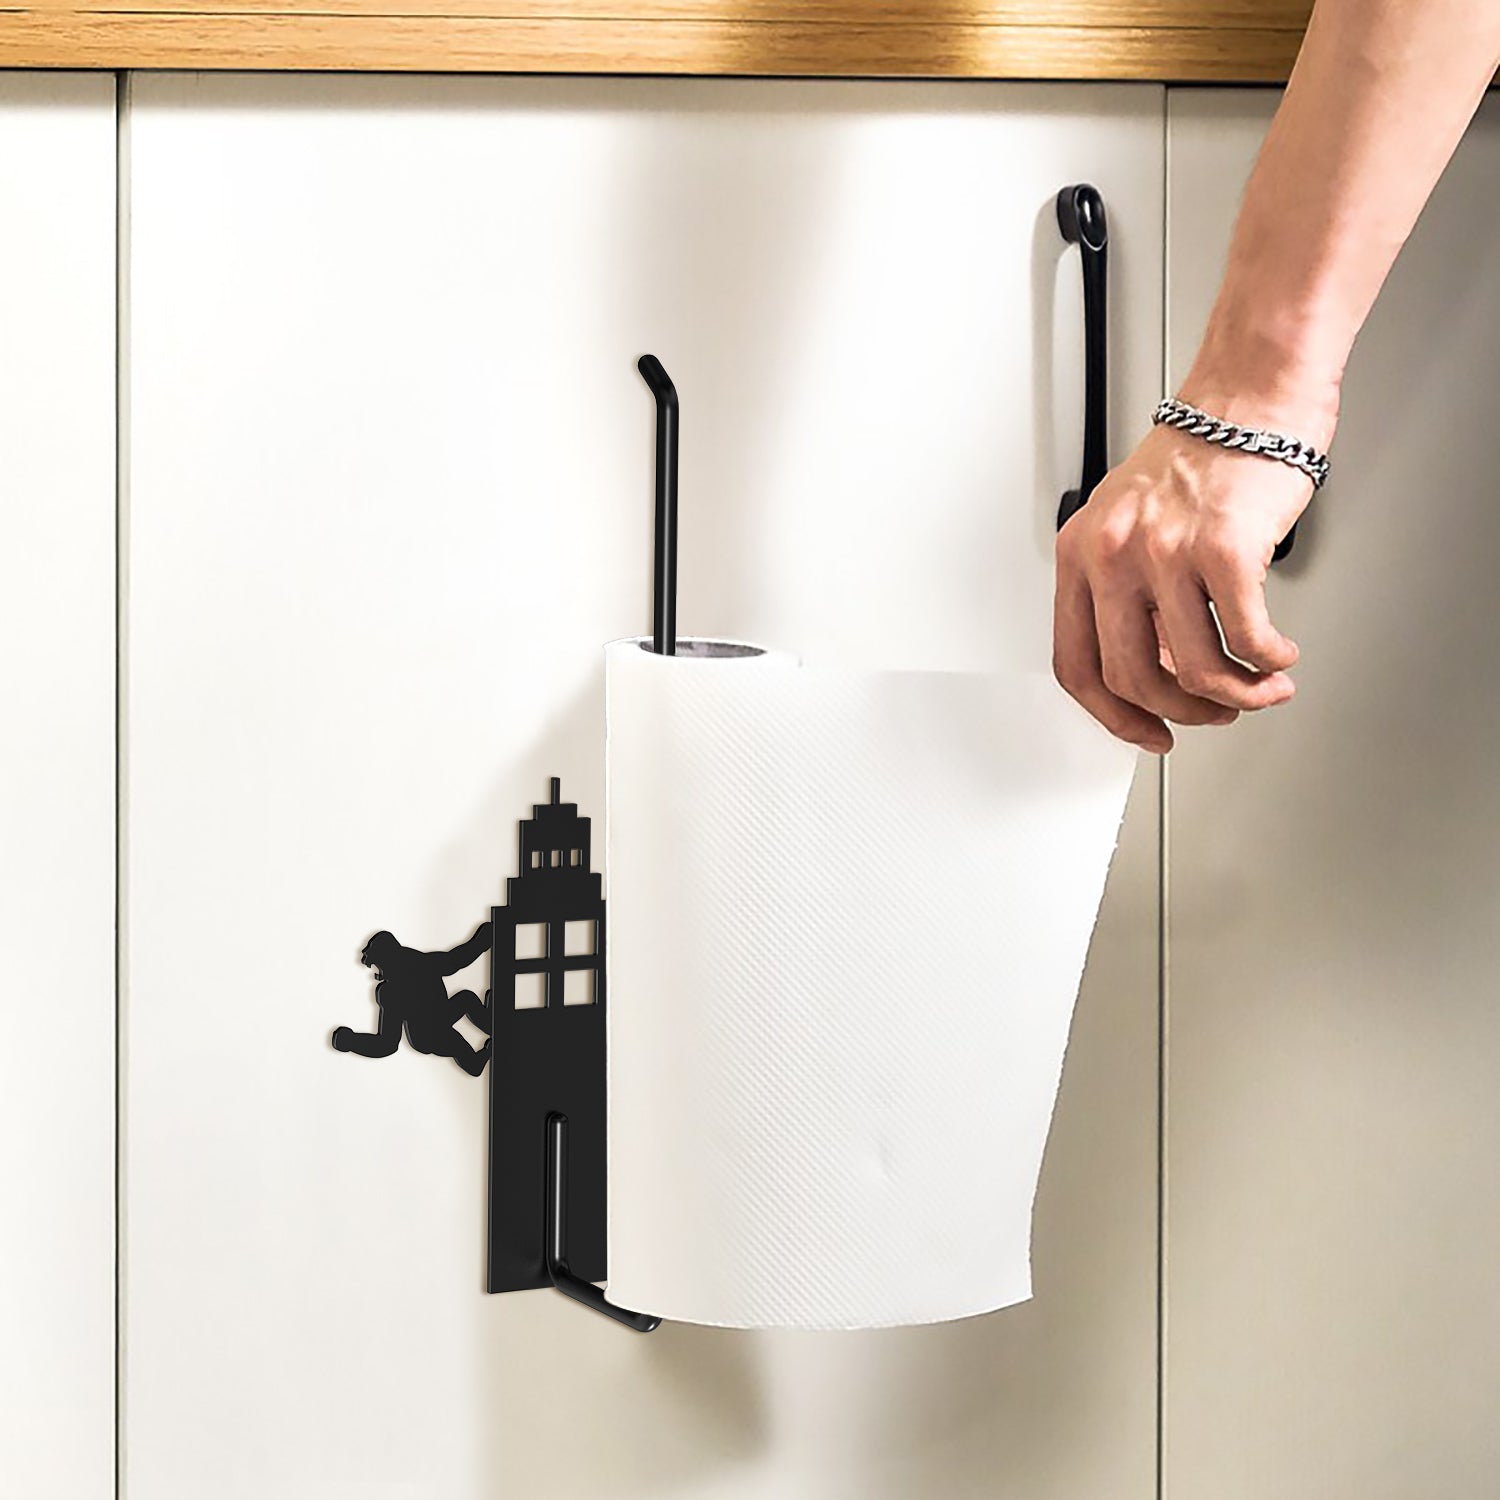 No-drilling Paper Towel Holder, Self-adhesive Kitchen Roll Hanger